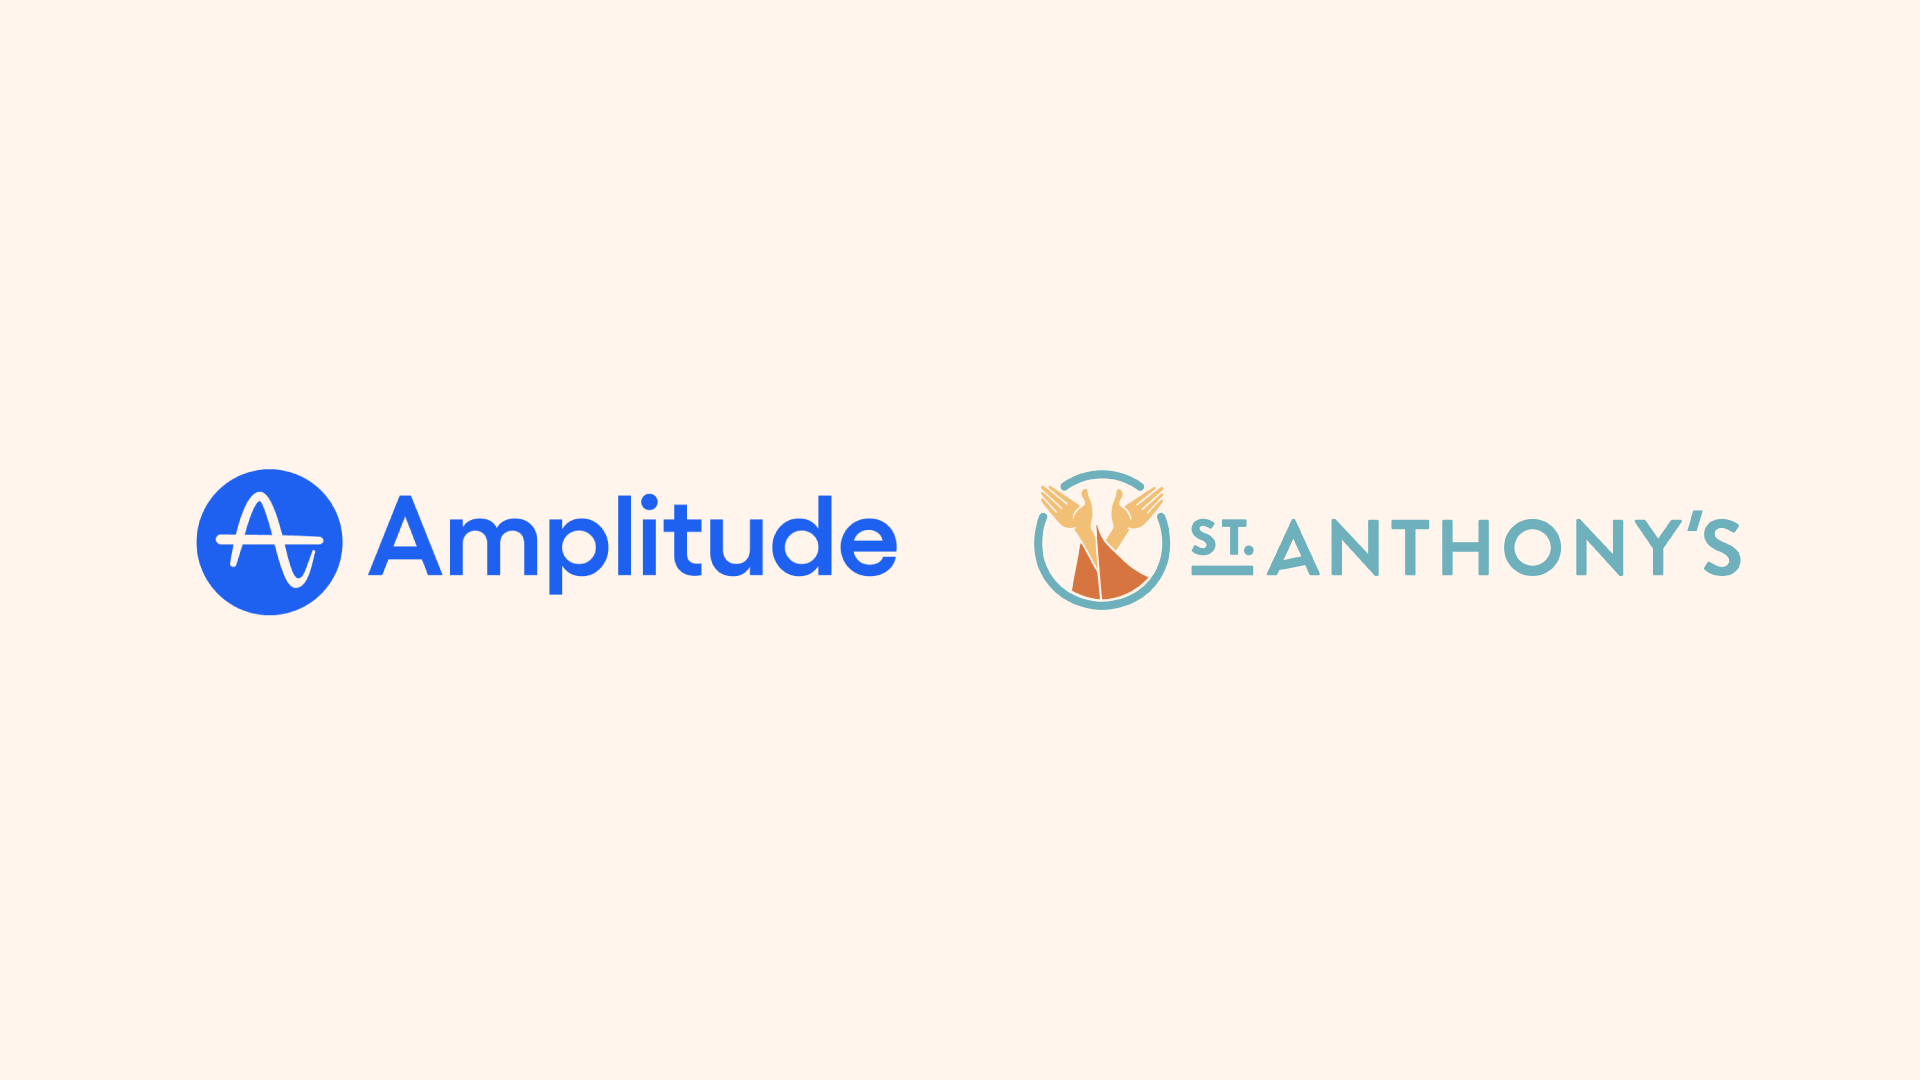 San Francisco-based, Amplitude, Donated More Than 12,000 Pairs of Socks for St. Anthony’s Free Clothing Program